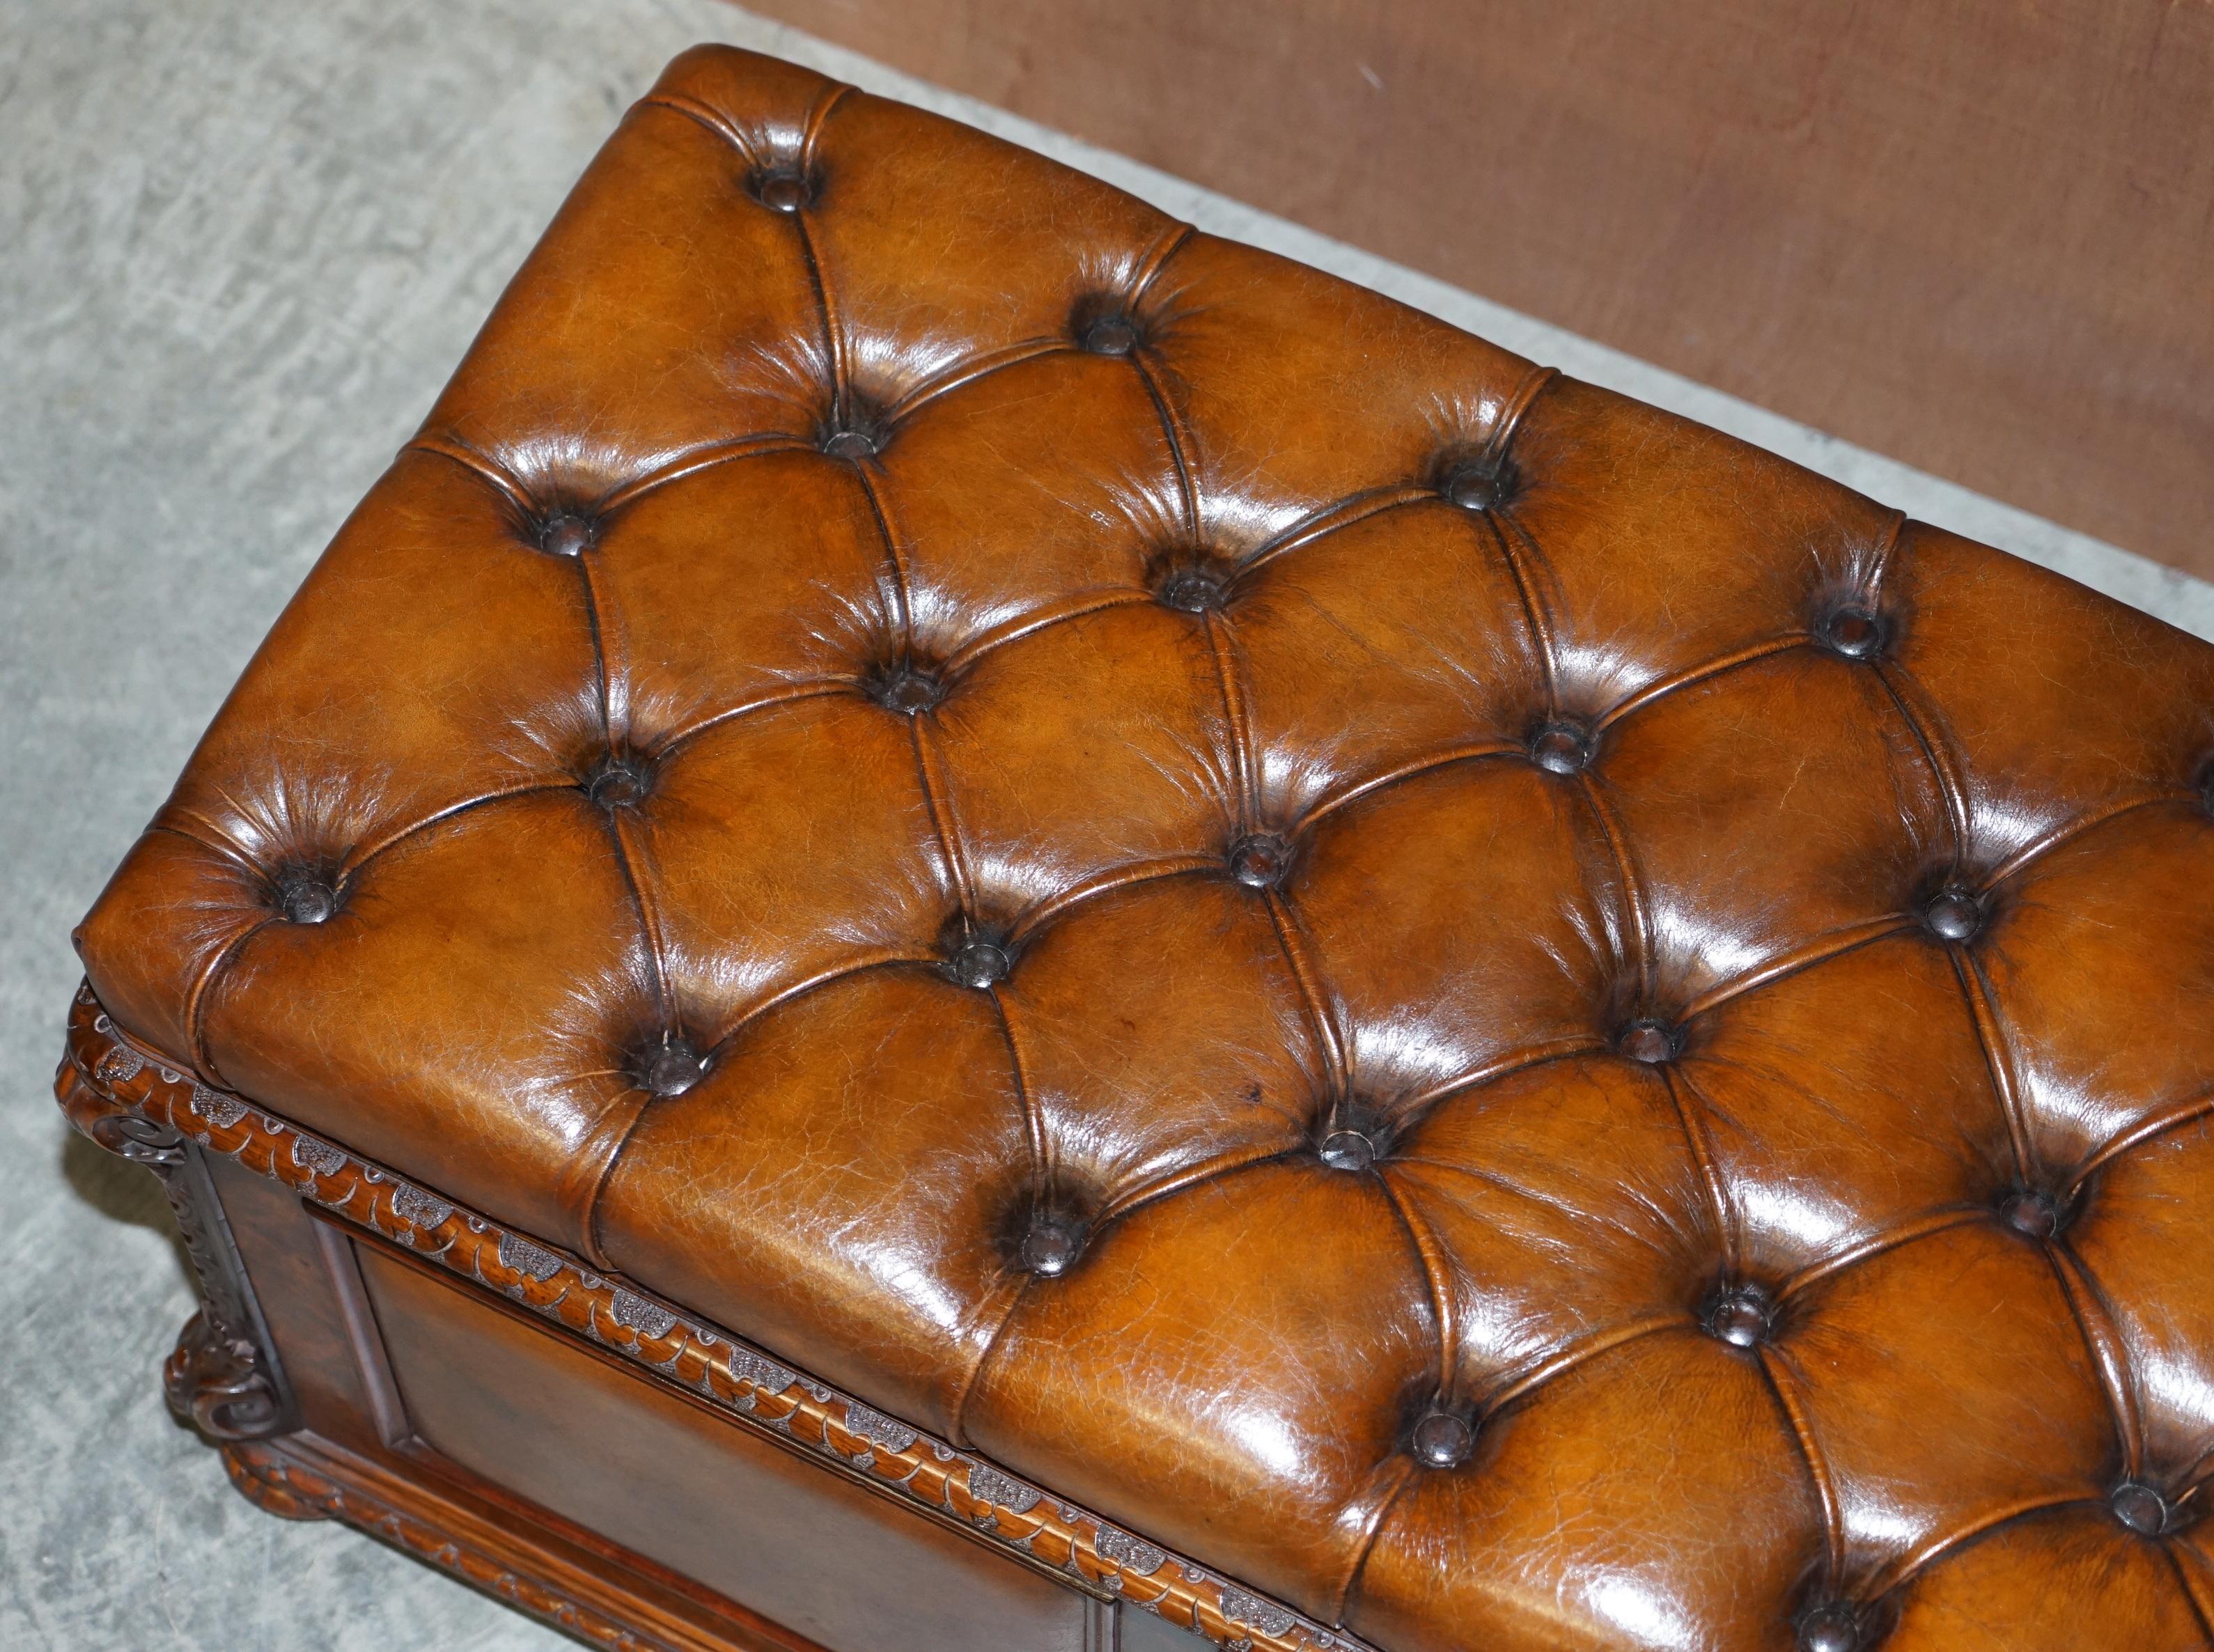 We are delighted to offer this absolutely exquisite two-person large ottoman that has been fully restored in Burr Walnut with brown leather panels and Chesterfield tufting

This is the finest ottoman you will ever come across, restored to a